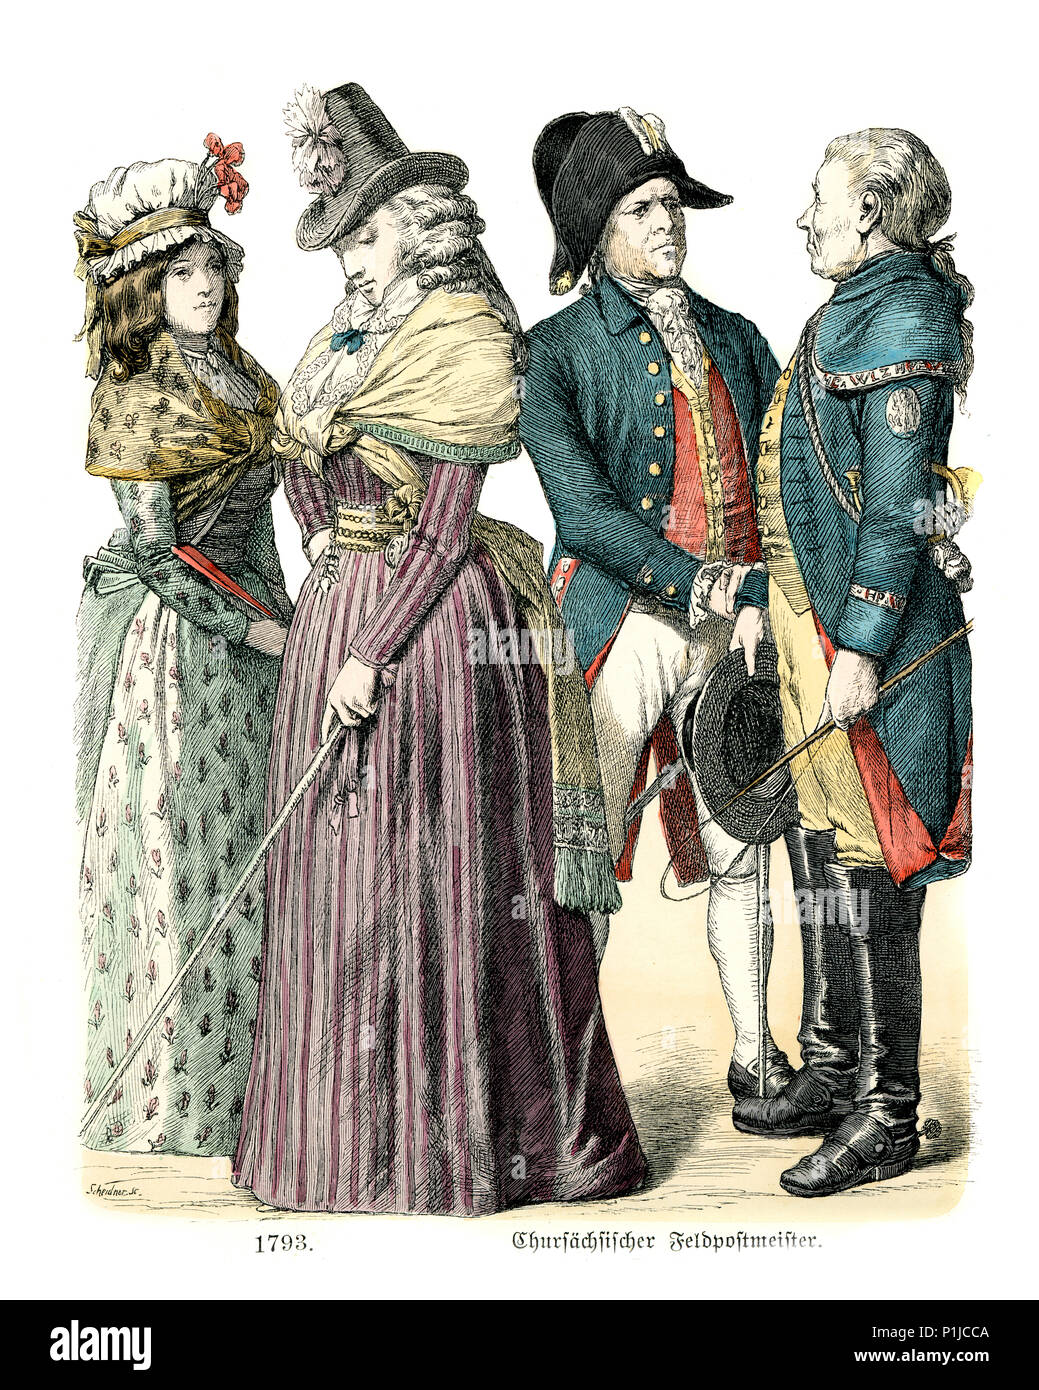 Vintage engraving of History of Fashion, Costumes of Germany 18th Century Stock Photo